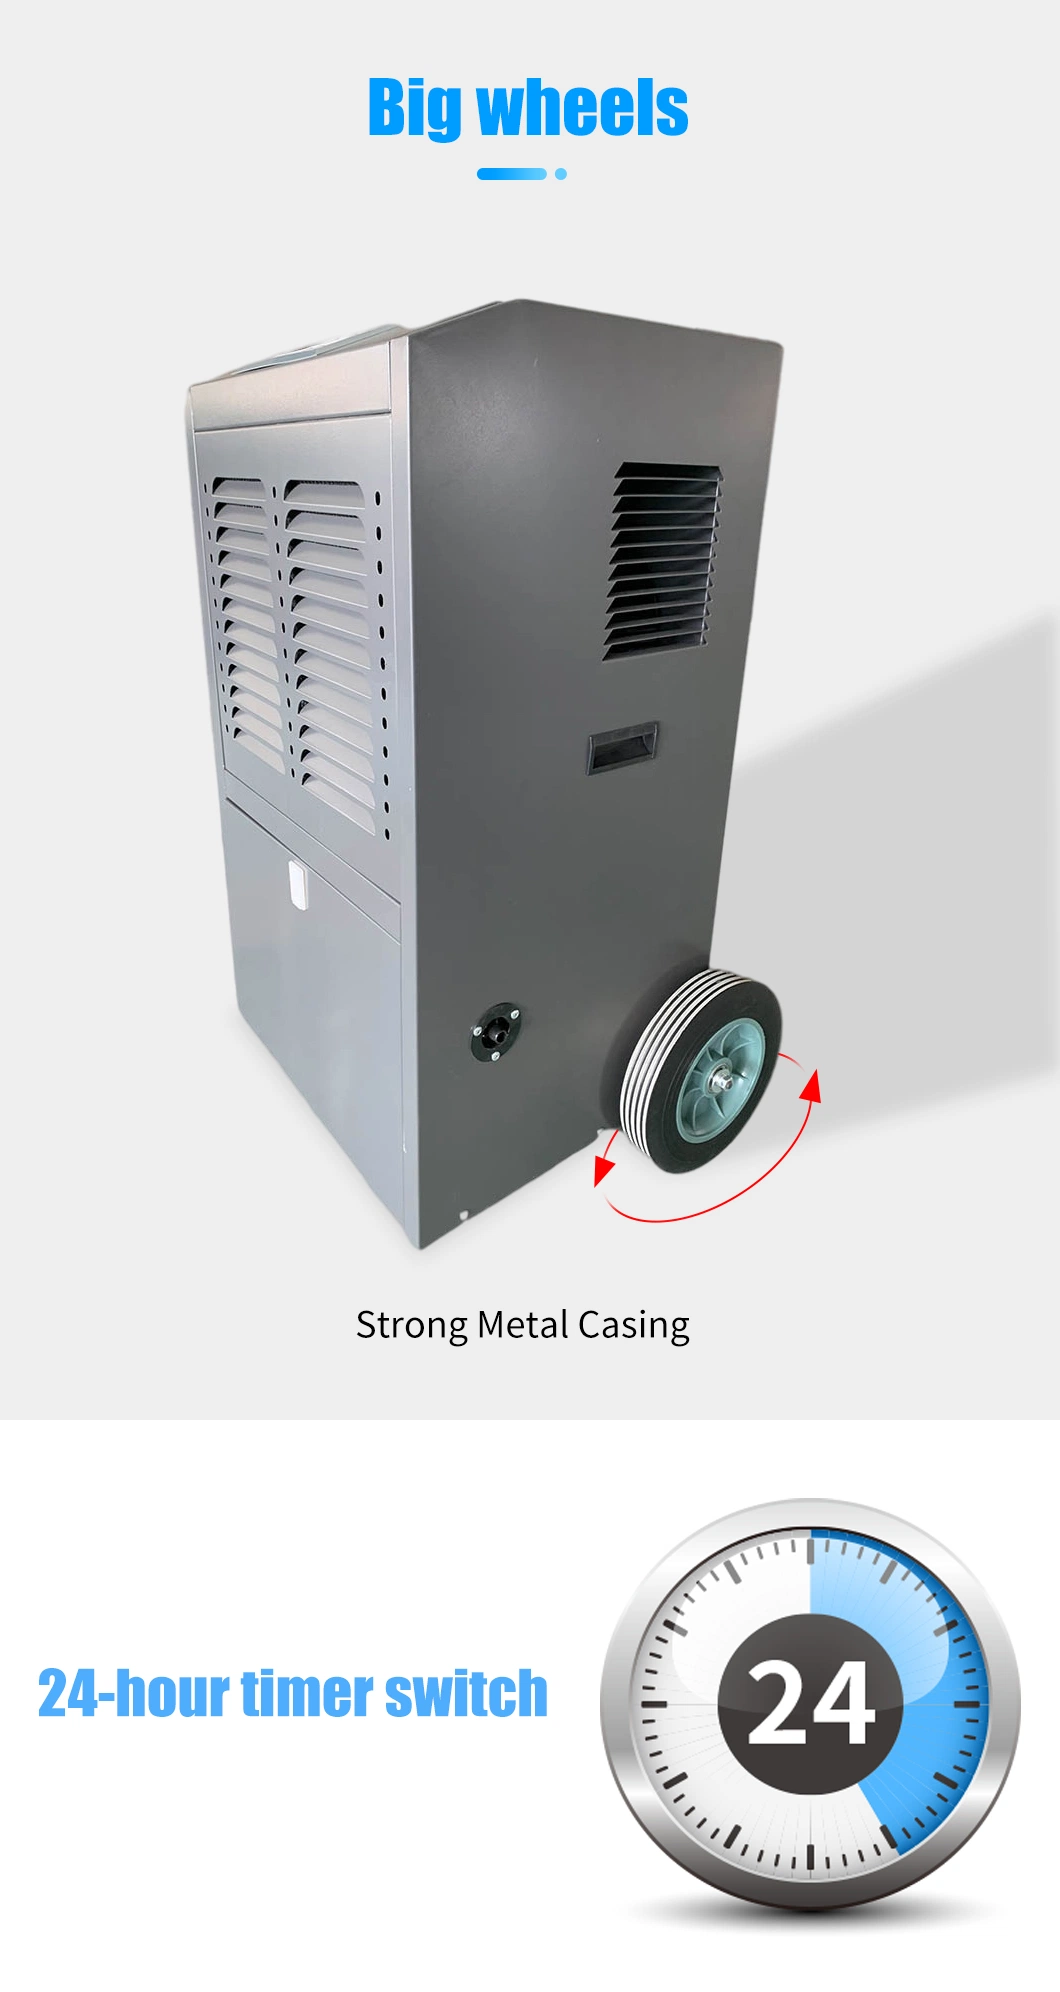 China Wholesale Industrial Dehumidifier 90L Dehumidification System Electrical Refrigerative Commercial Dehumidifier